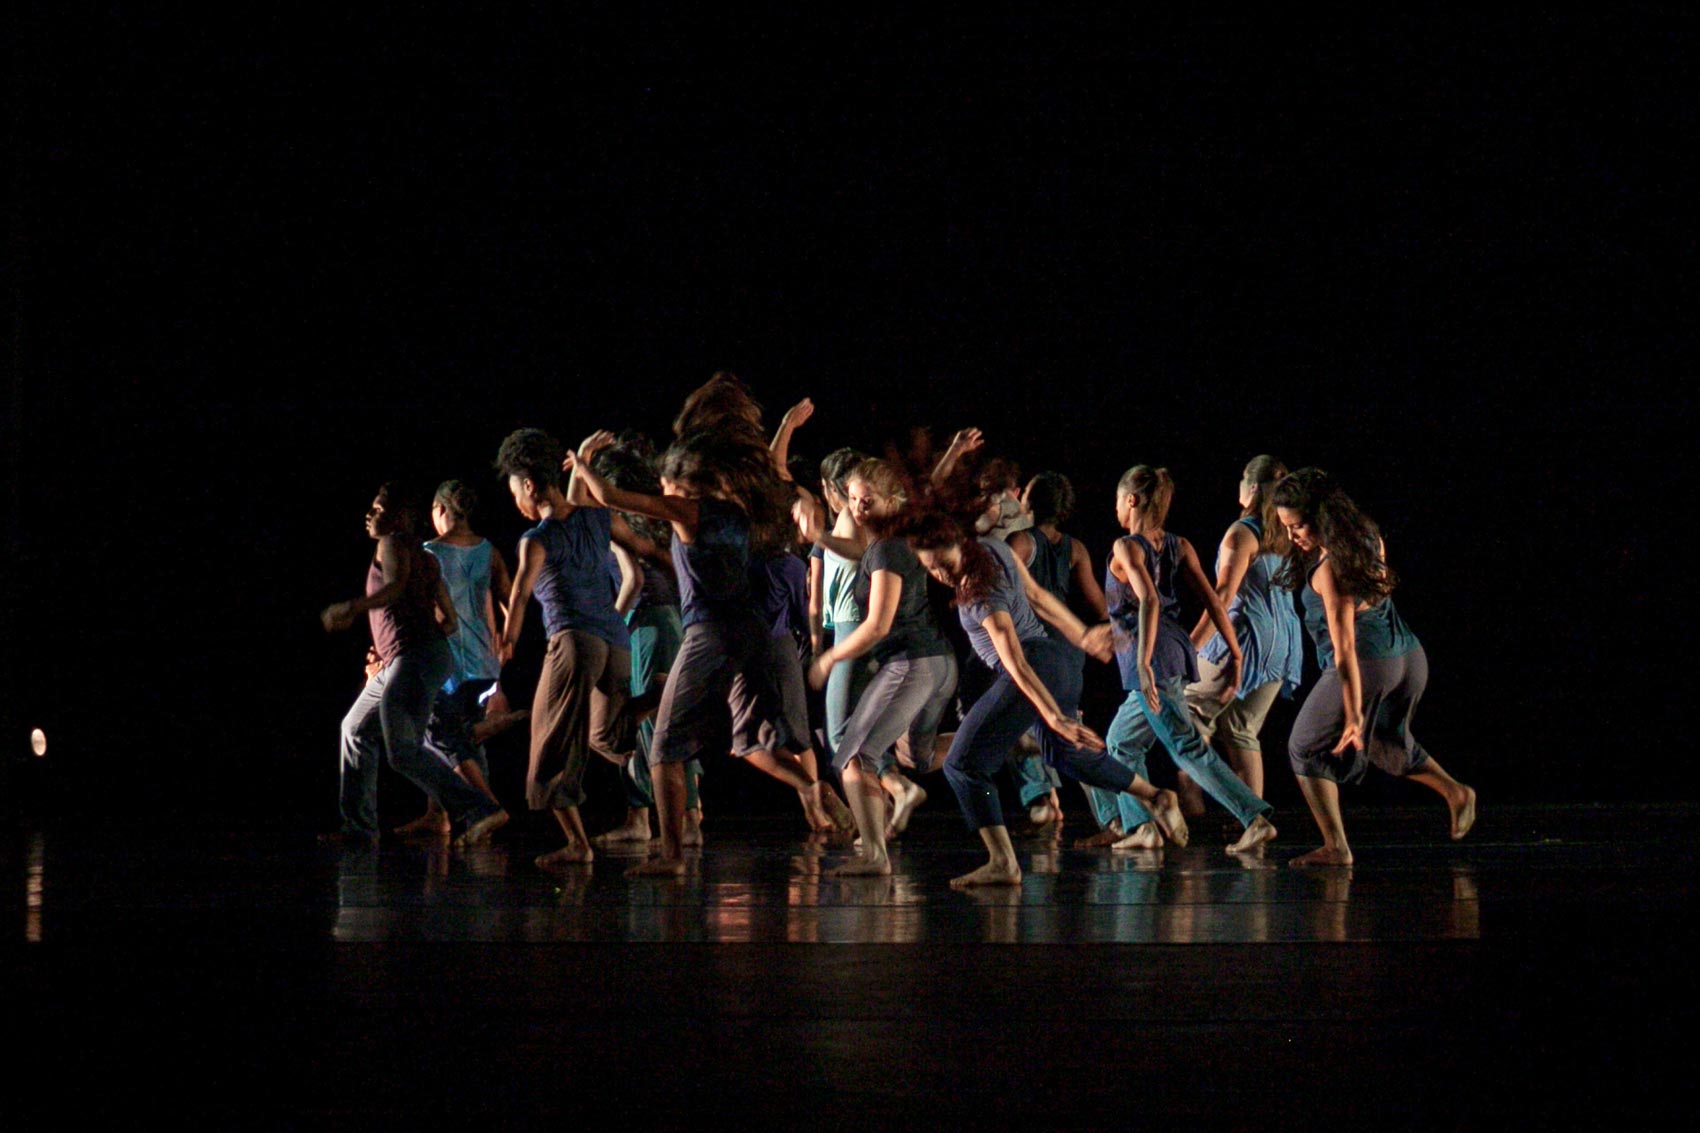 A large group of dancers move together on stage.